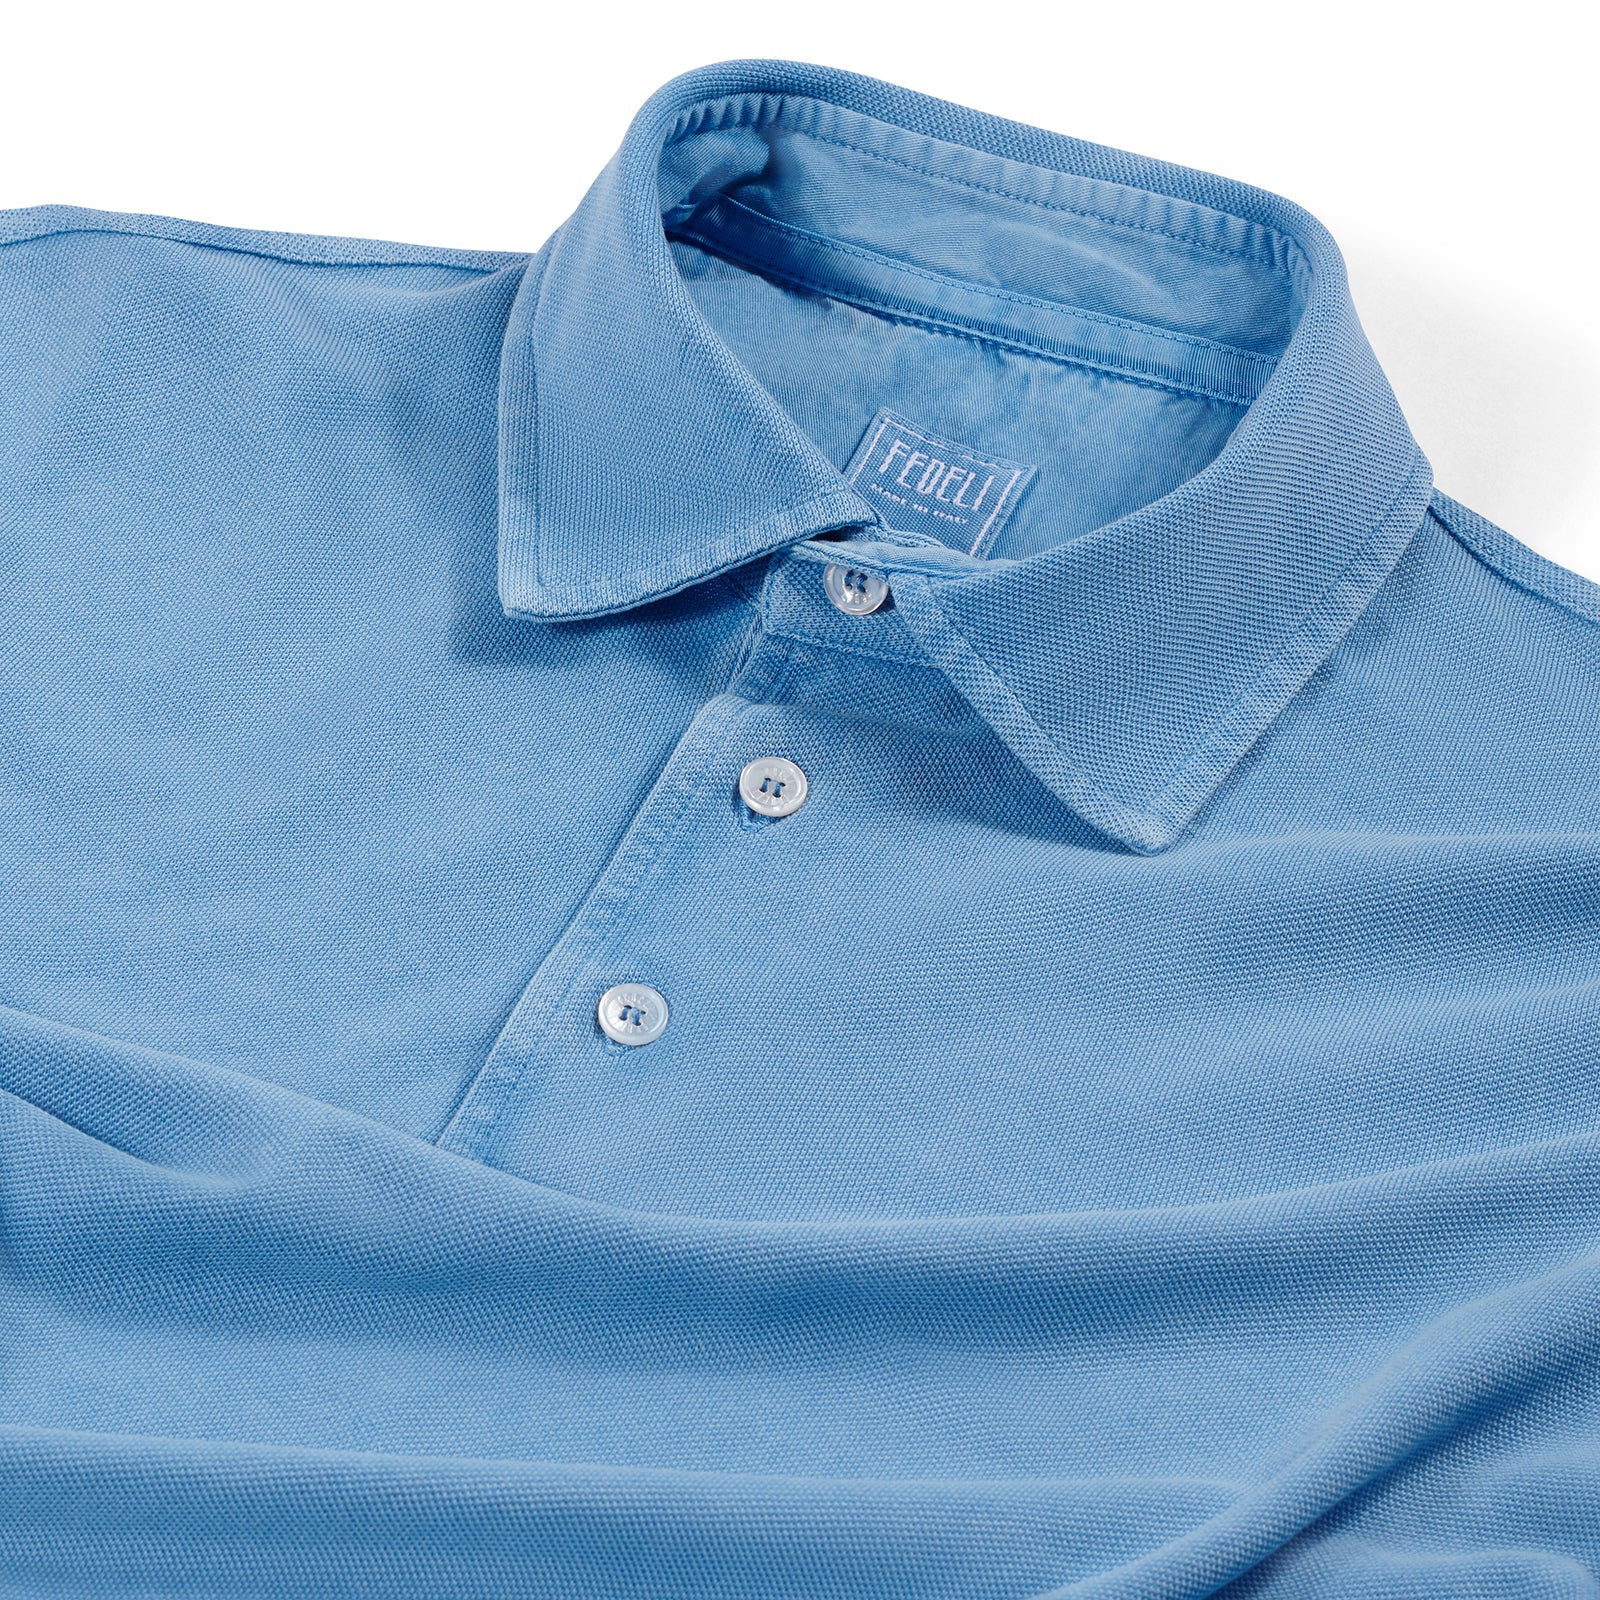 Fedeli Classic Short Sleeve Knitted Piqué Polo Shirt in Sky Blue